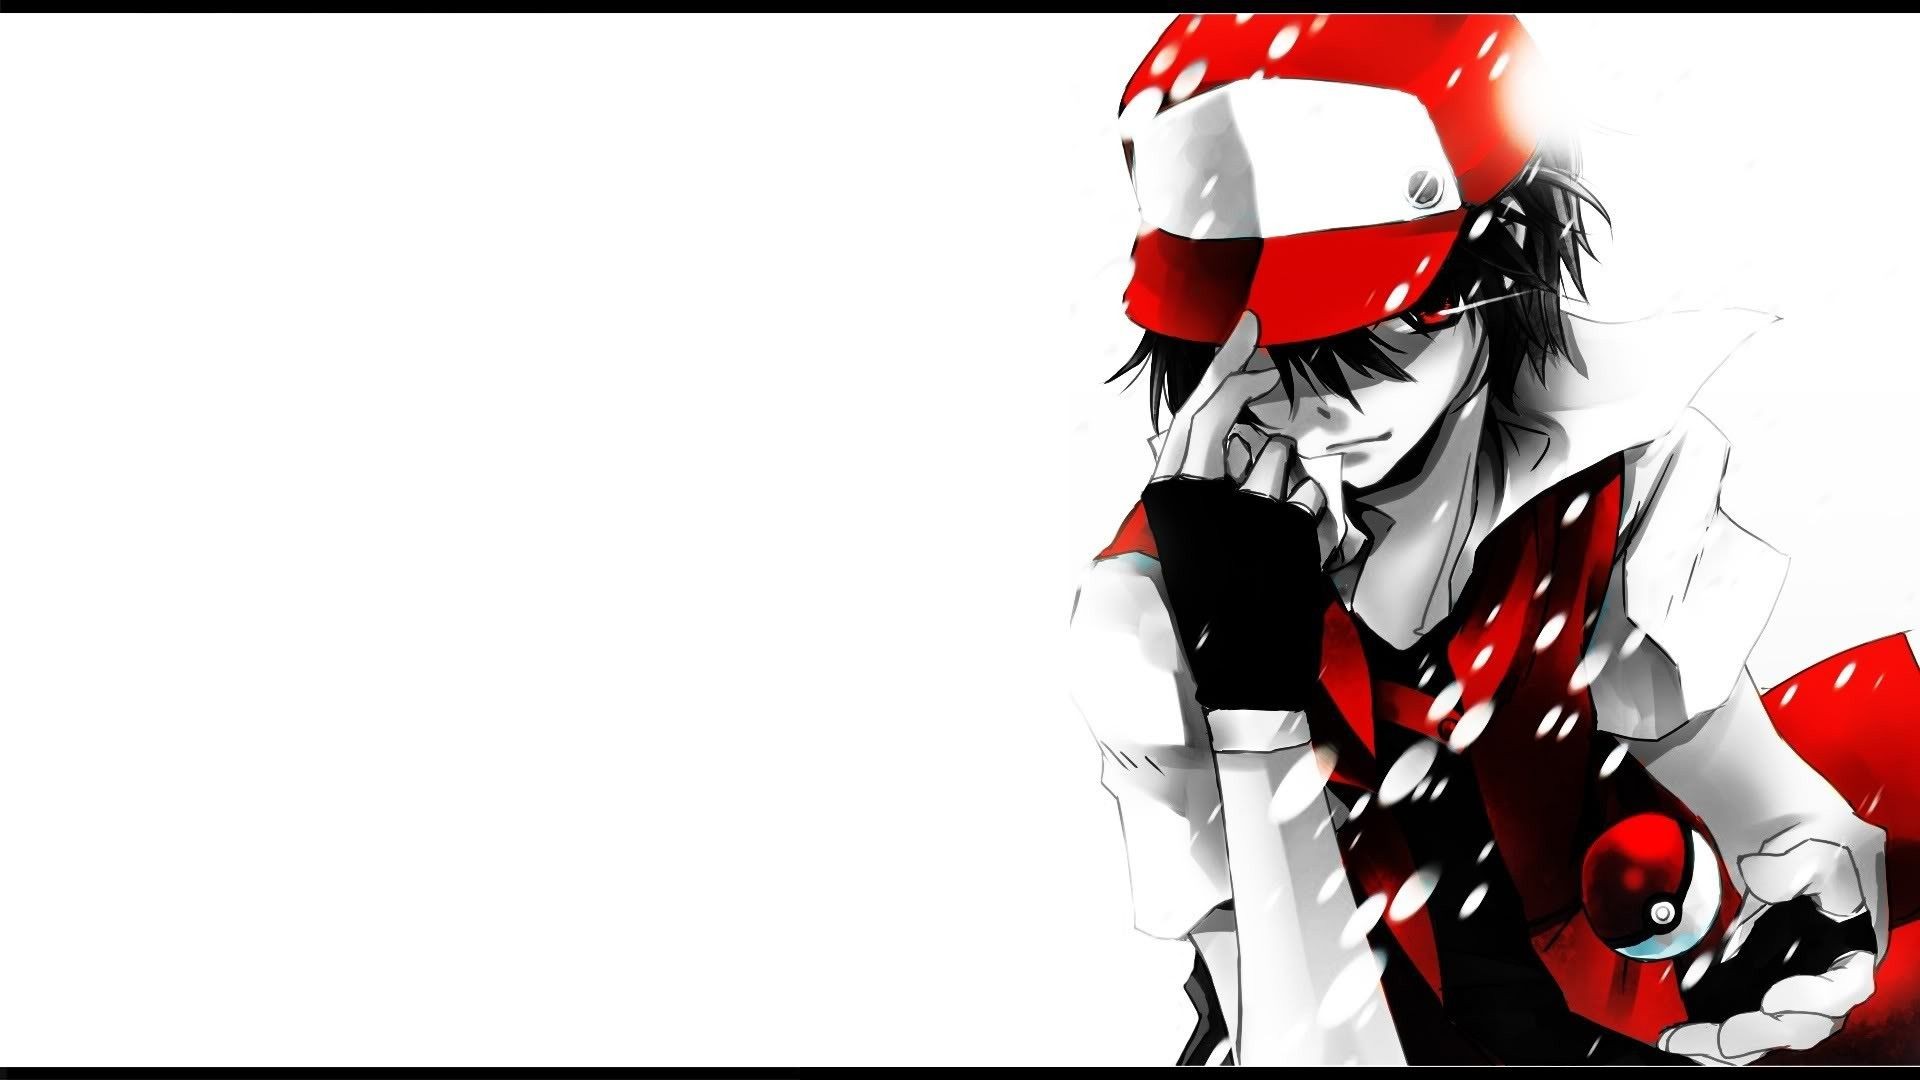 Anime Red Character Red Pokemon 1920x1080